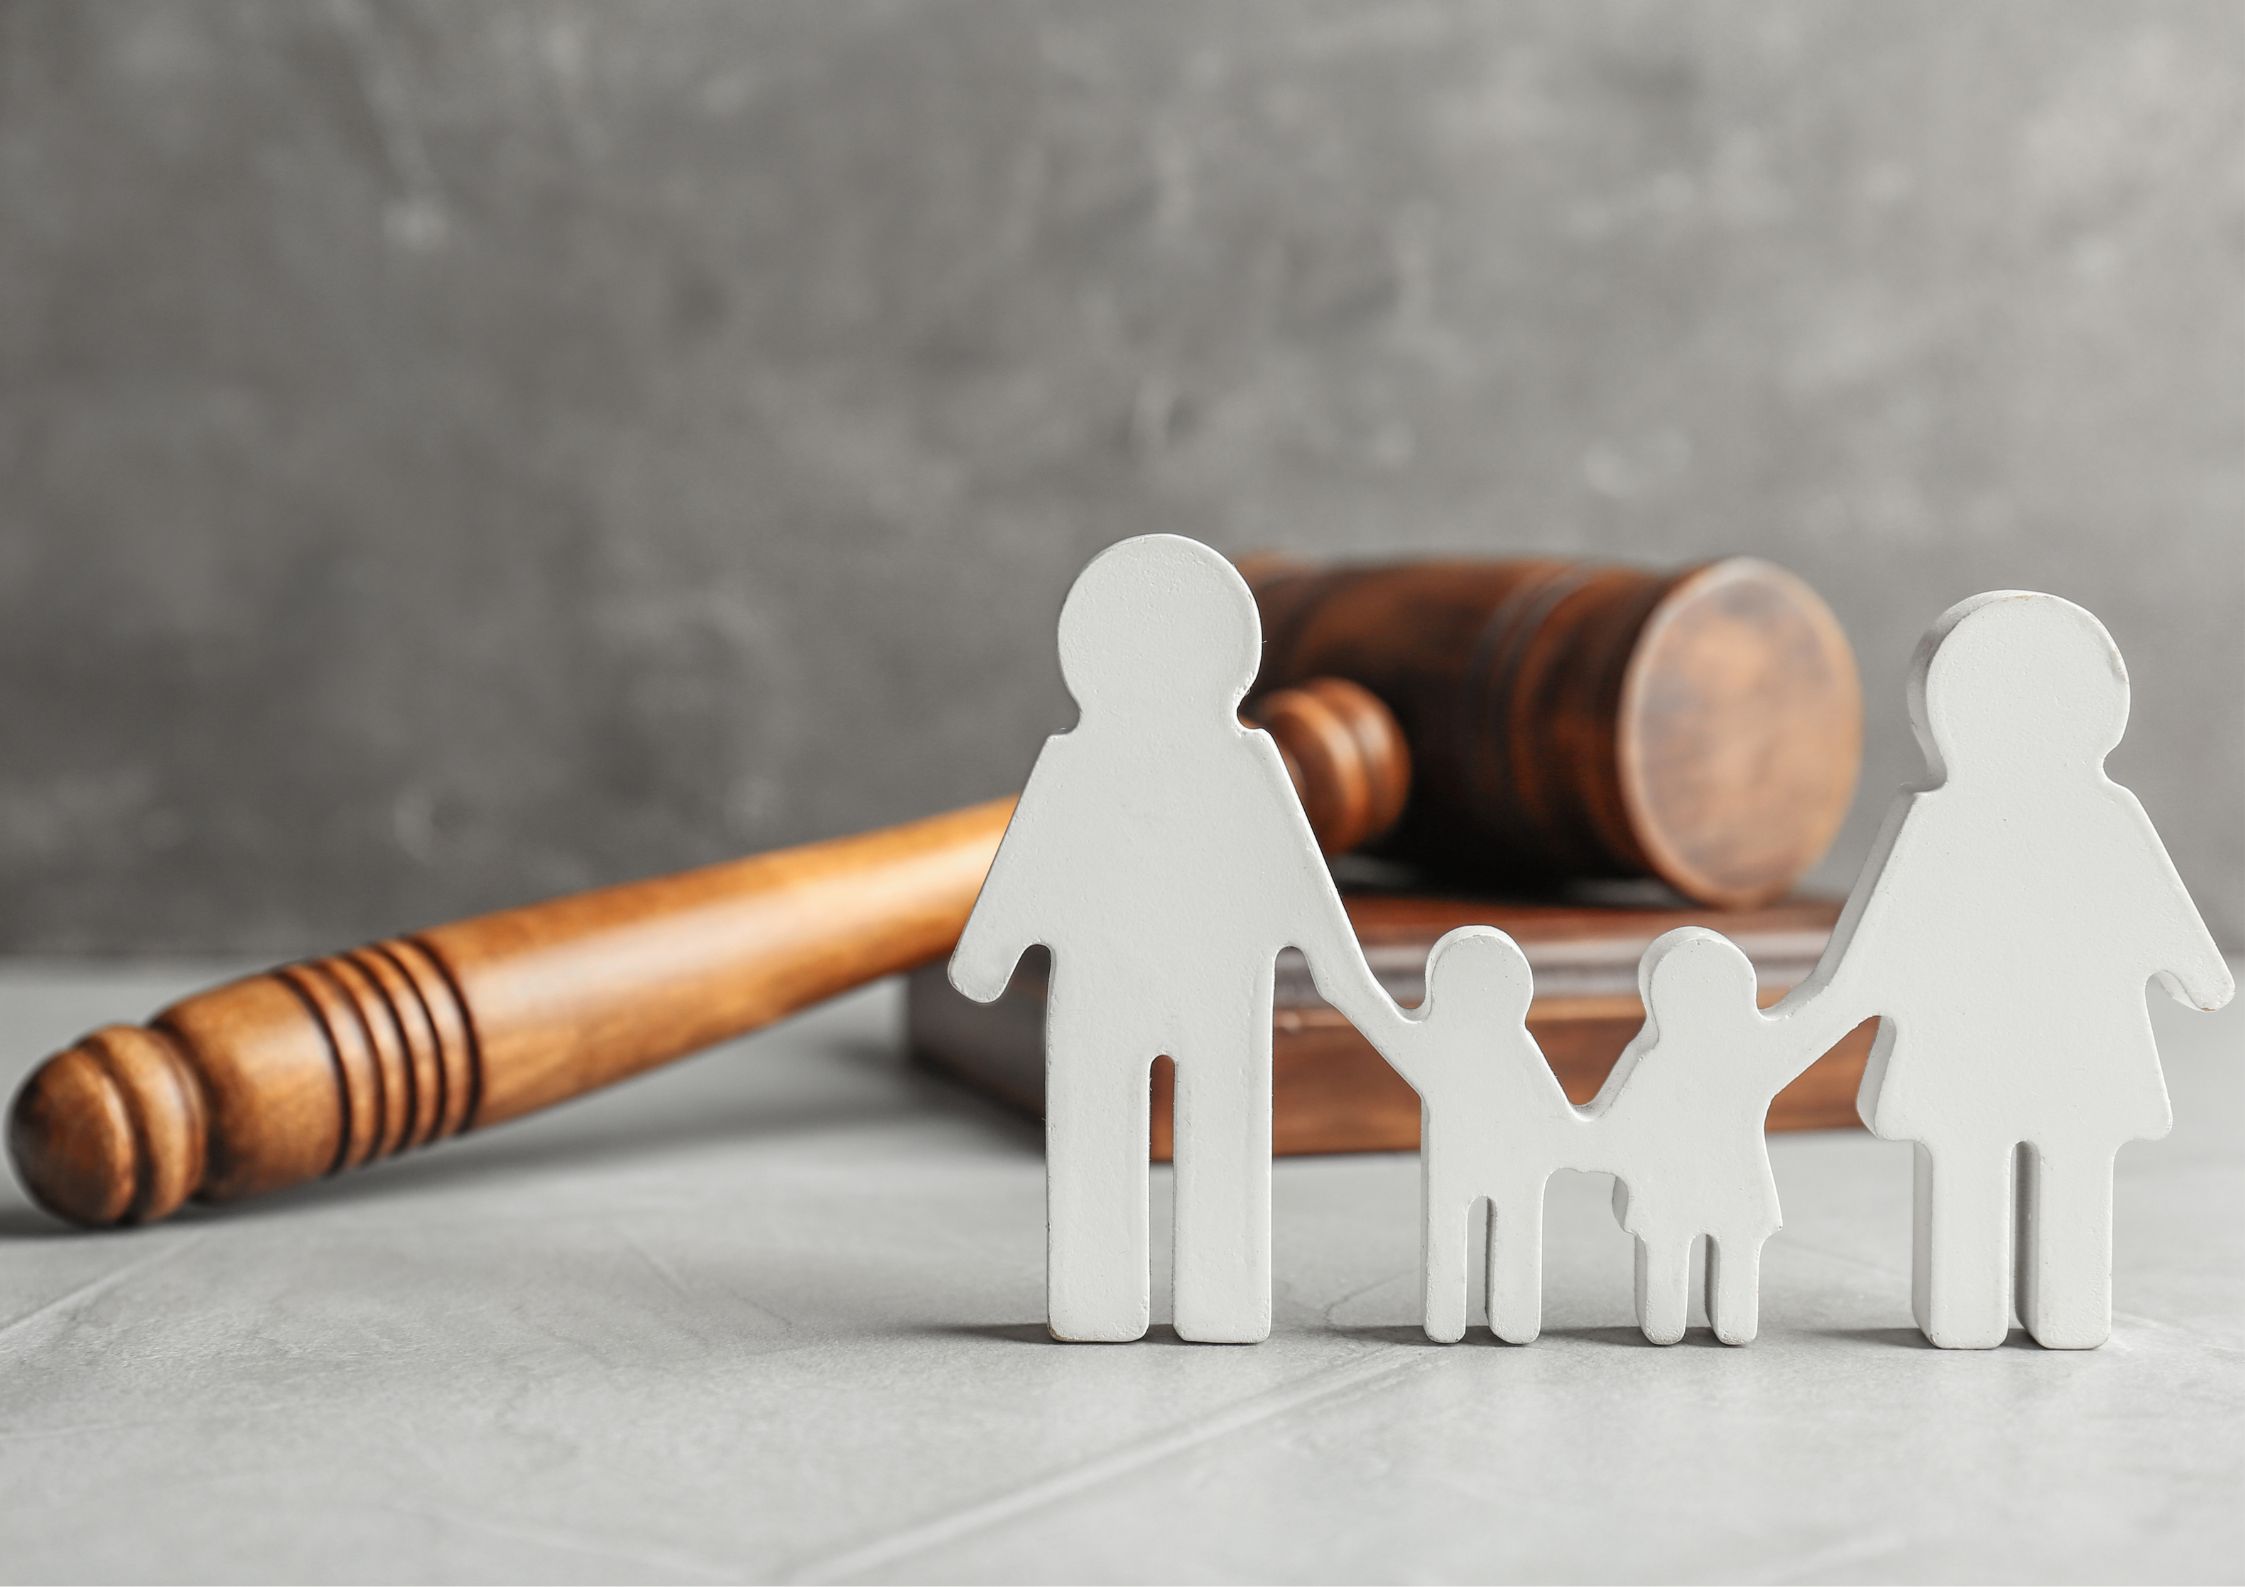 Family Law Valuations